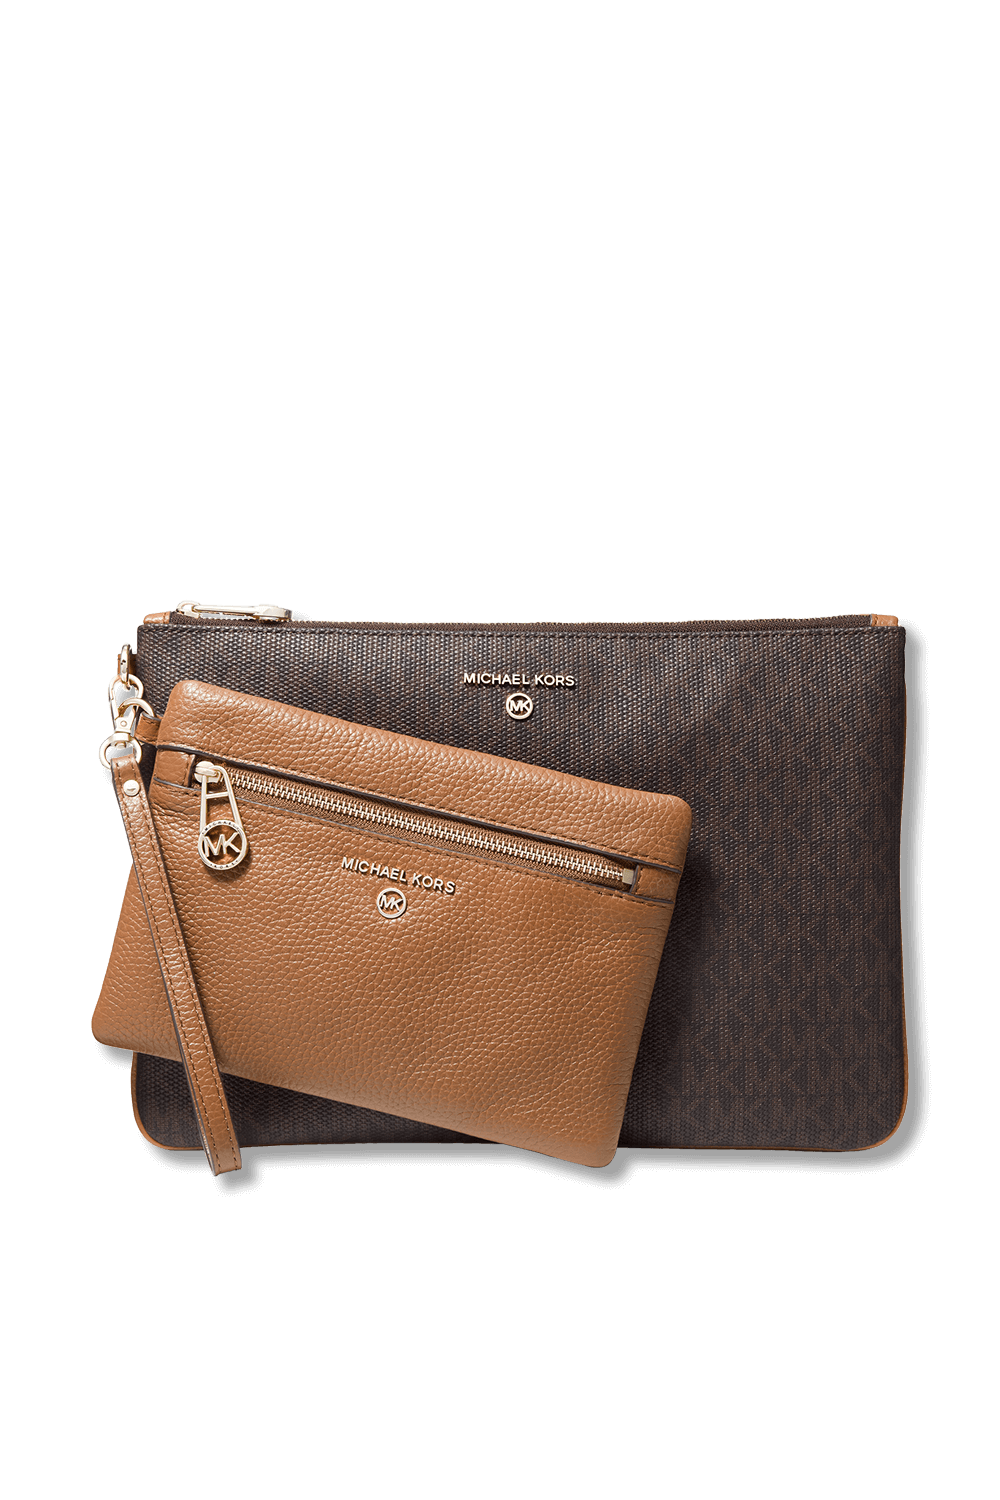 Slater Large Logo Brown and Leather 2-in-1 Wristlet MICHAEL KORS